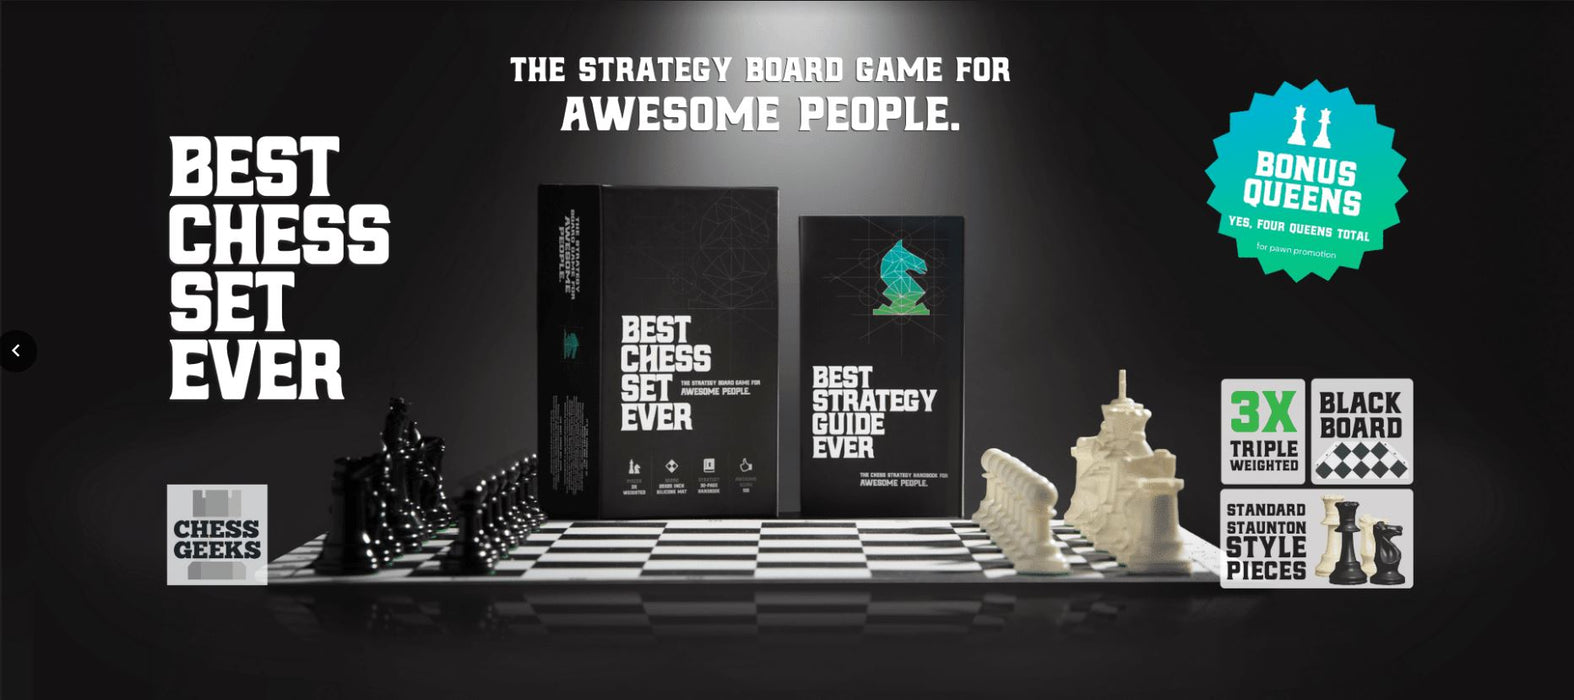 Best Chess Set Ever (Black and Green Reversible)